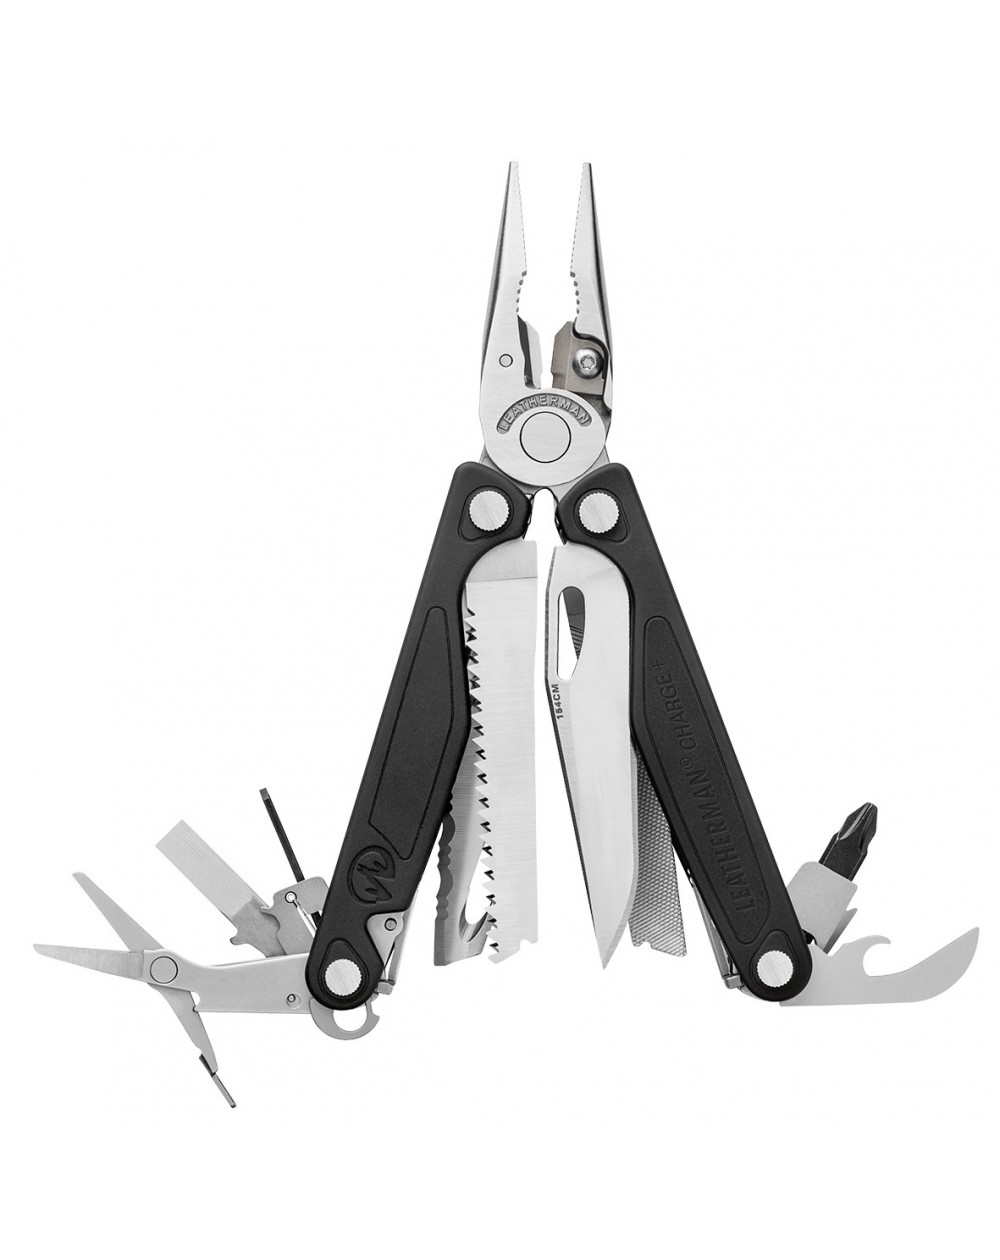 leatherman-pince-multifonctions-charge-plus-boite-832516-1